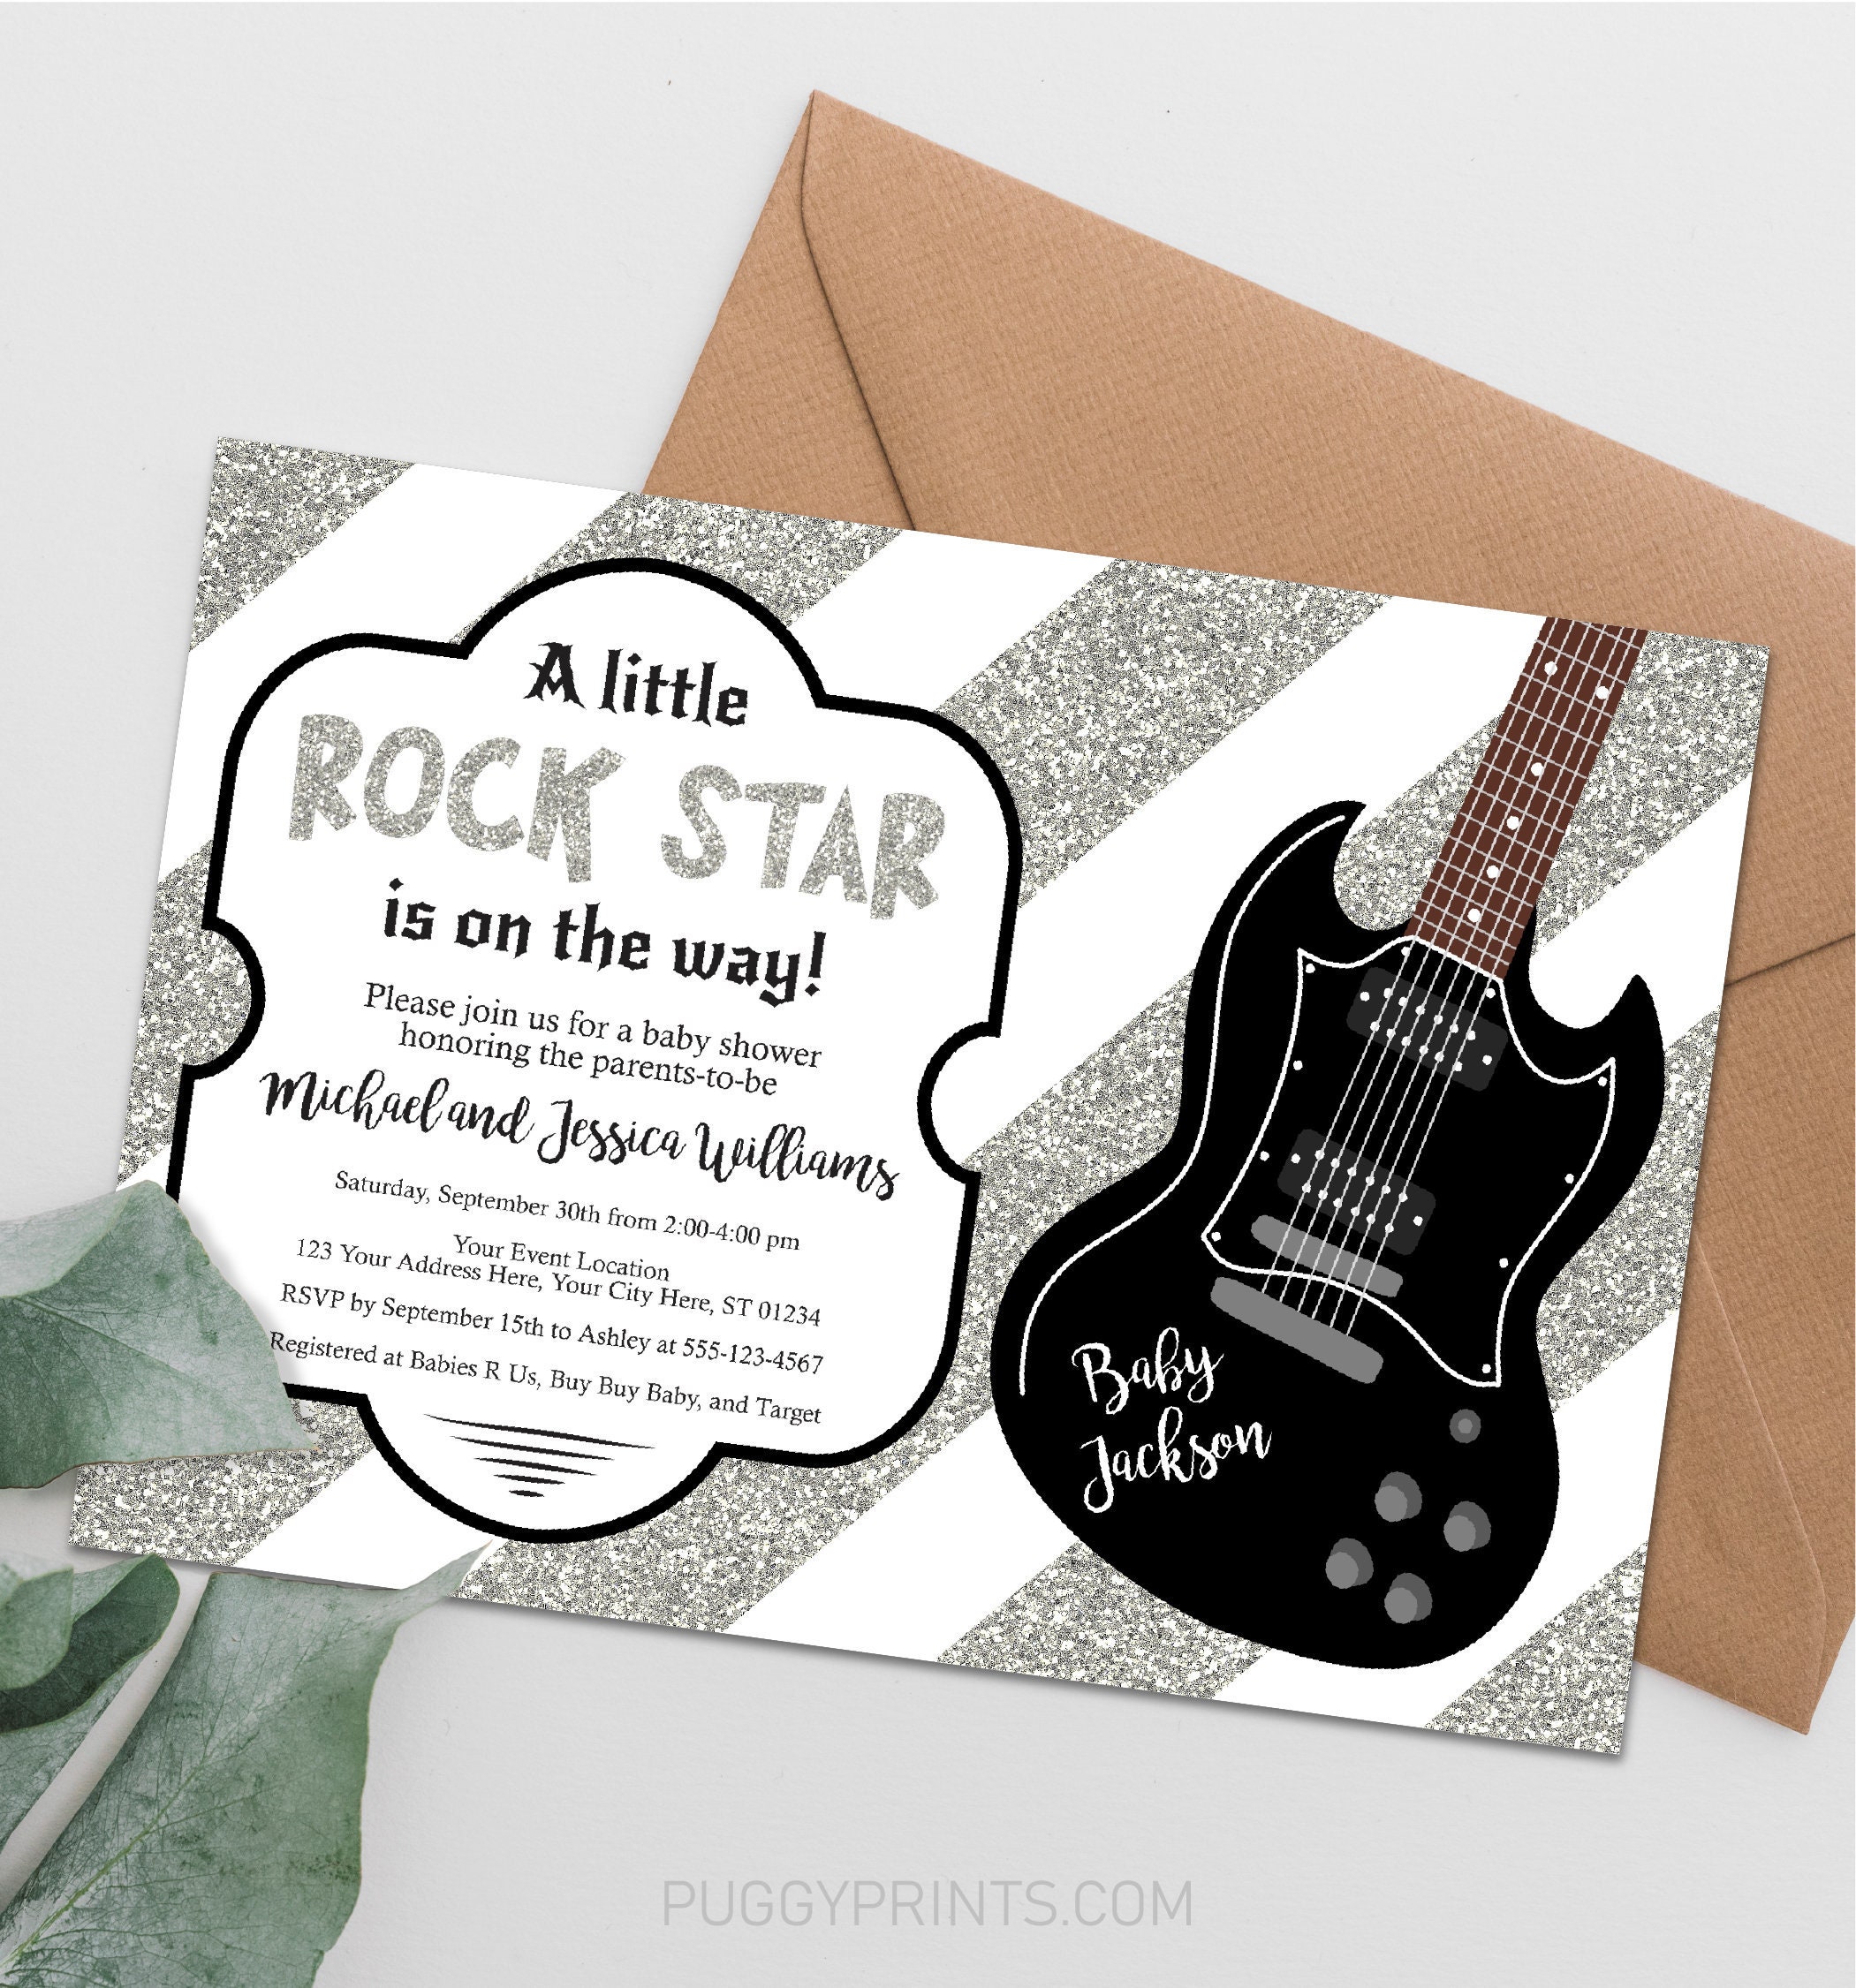 Gift Wrap (physical items only) – Rockabye Baby!